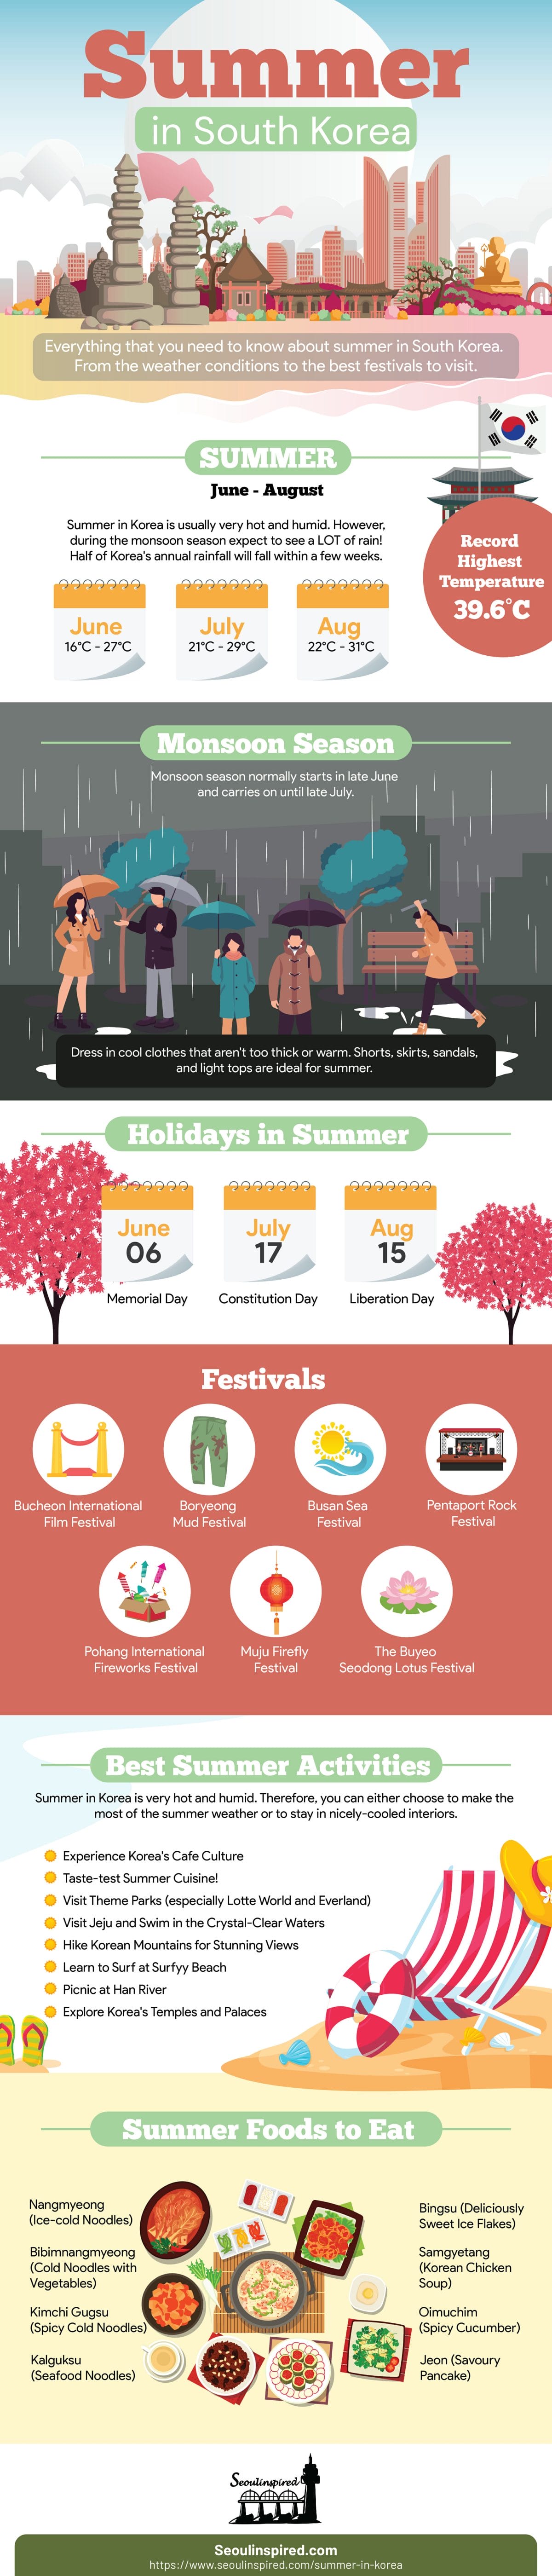 Summer in Korea - Summer Activities, Weather to Expect and More! 1